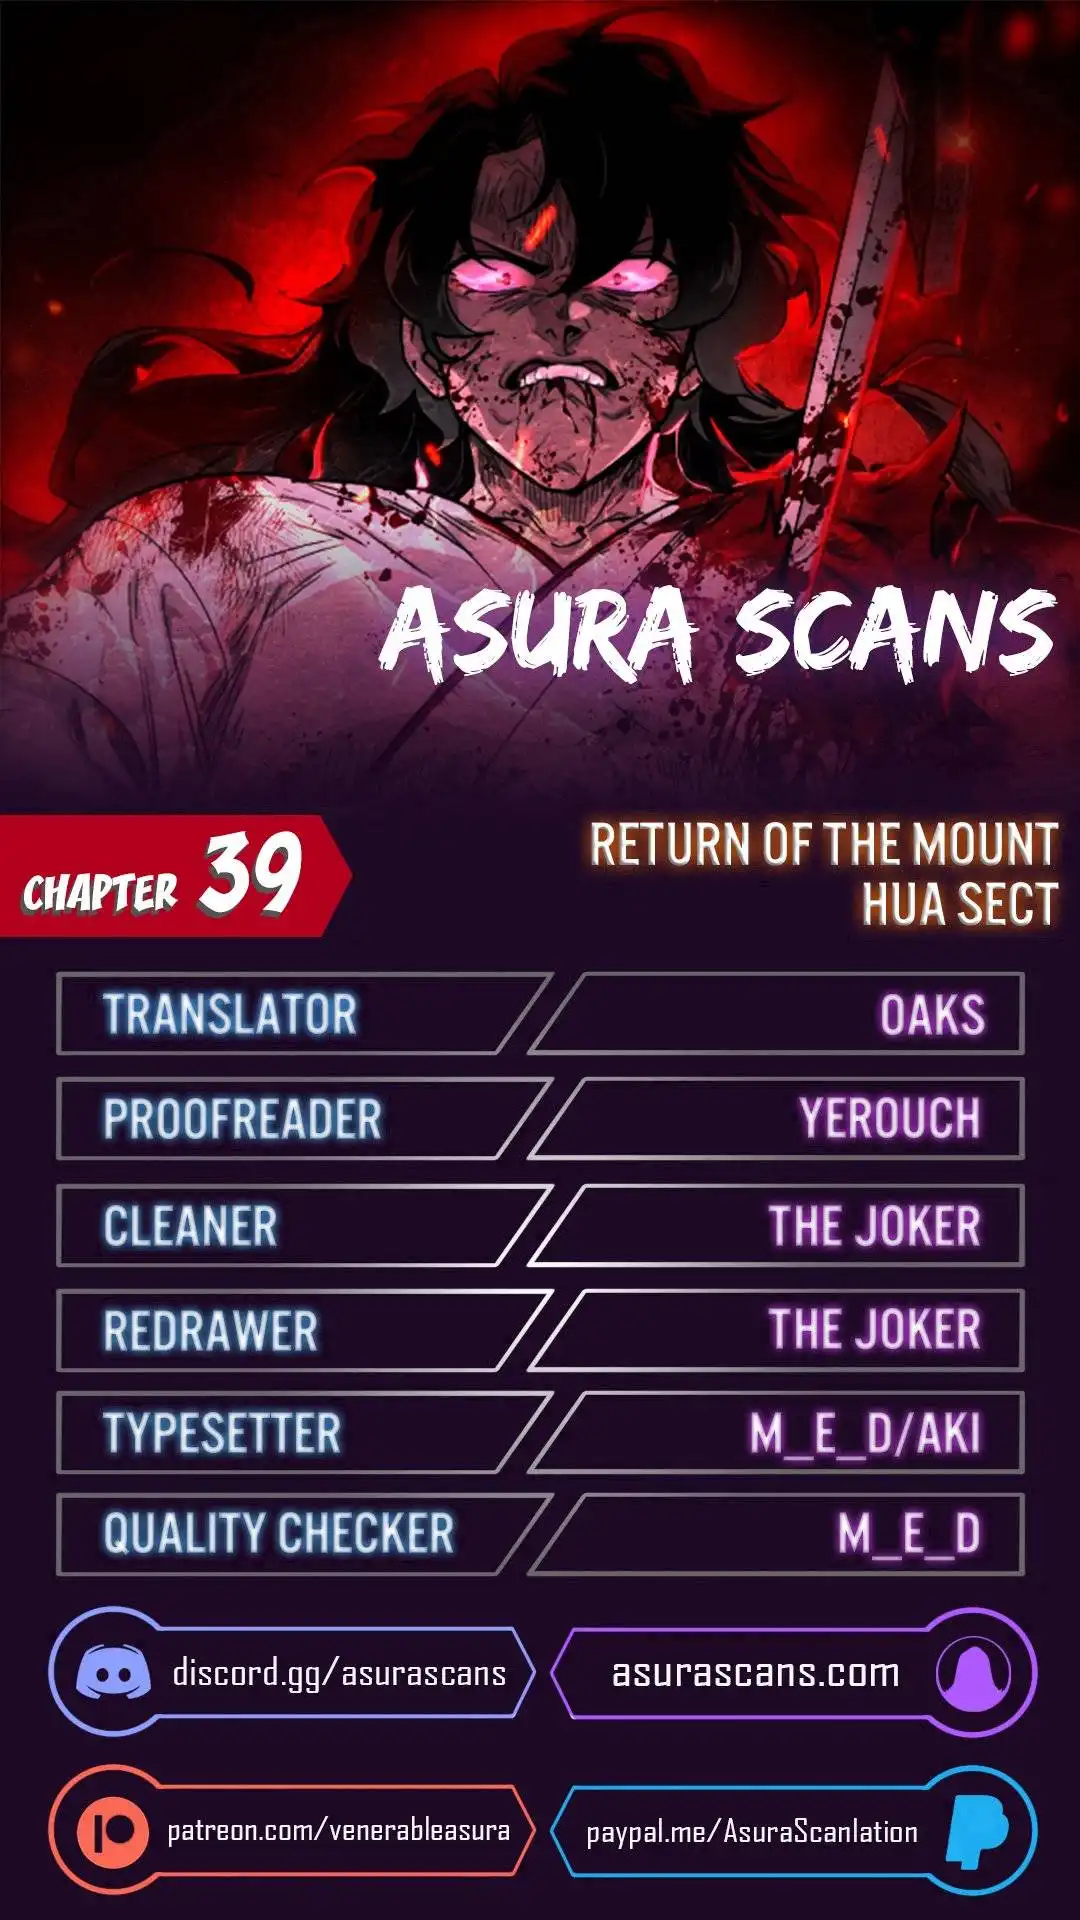 Return of the Mount Hua Sect Chapter 39